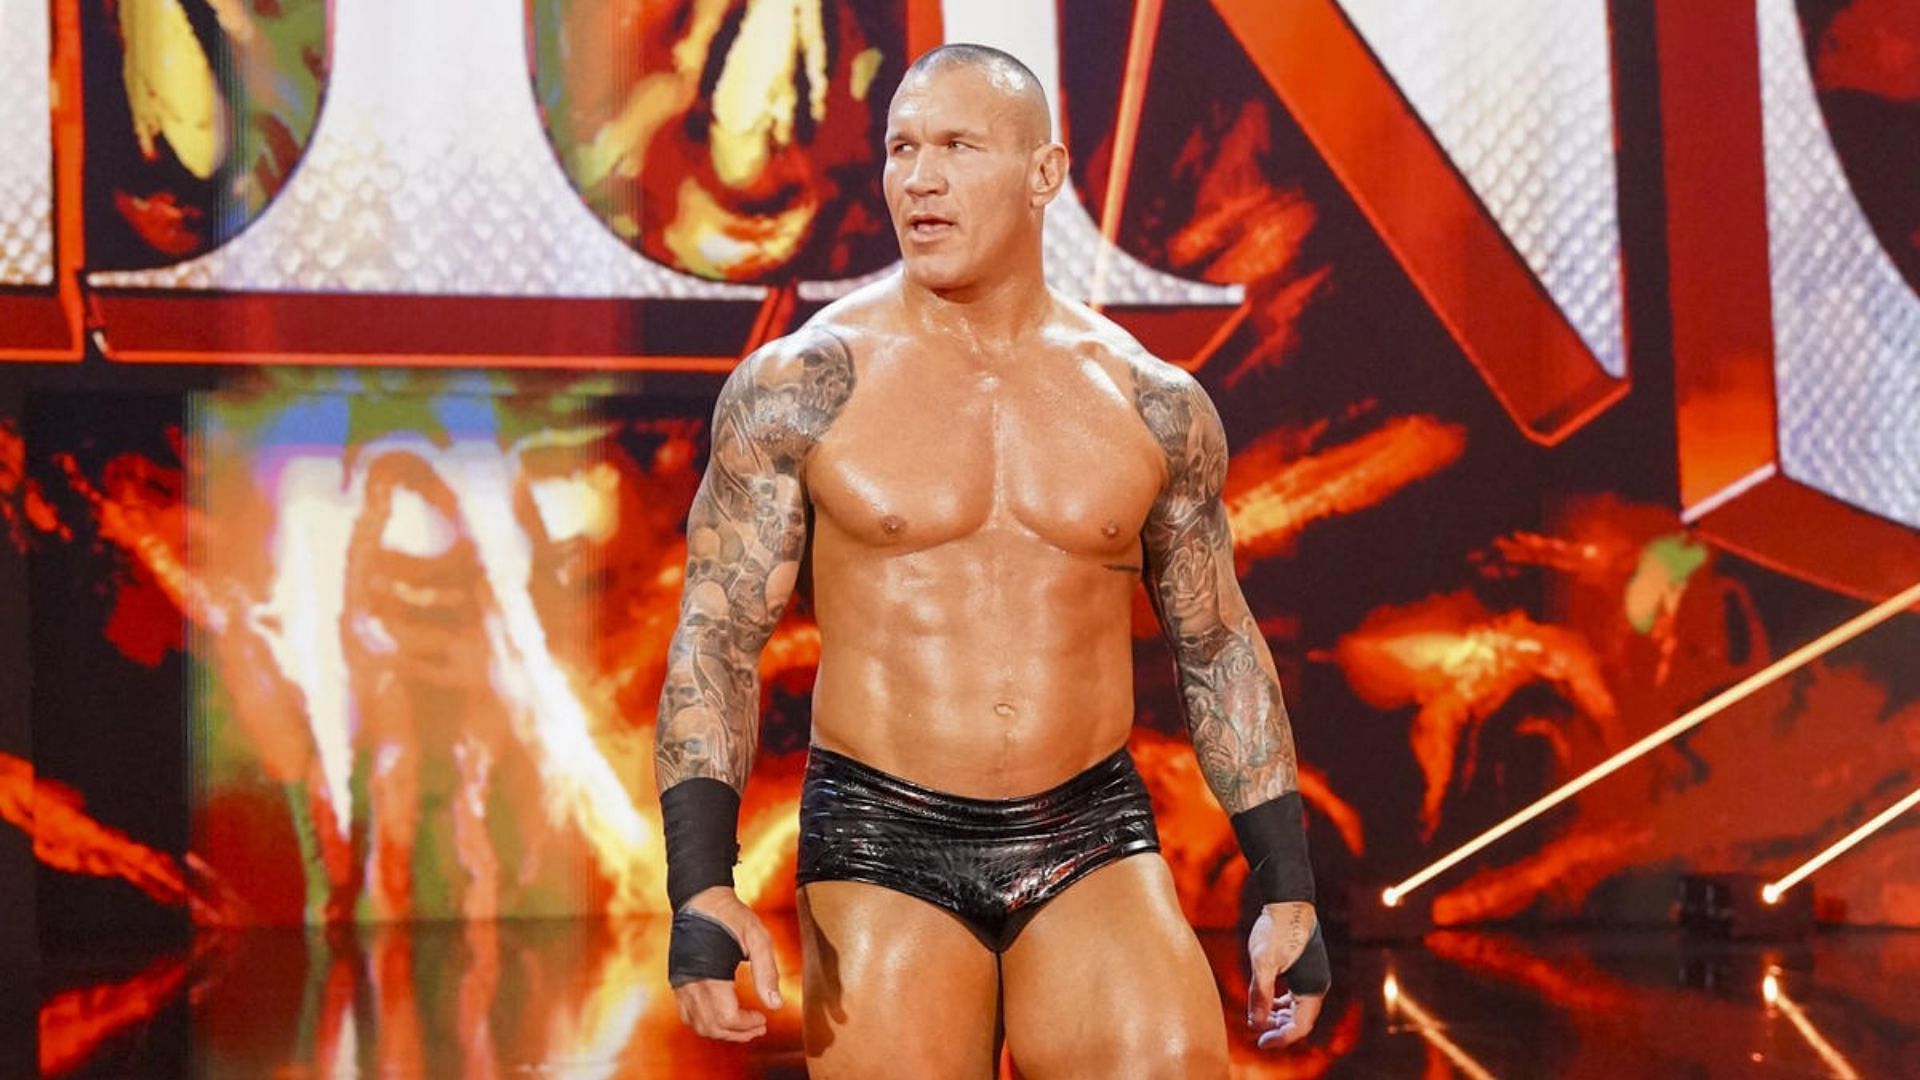 Randy Orton is one of the most beloved WWE veterans today